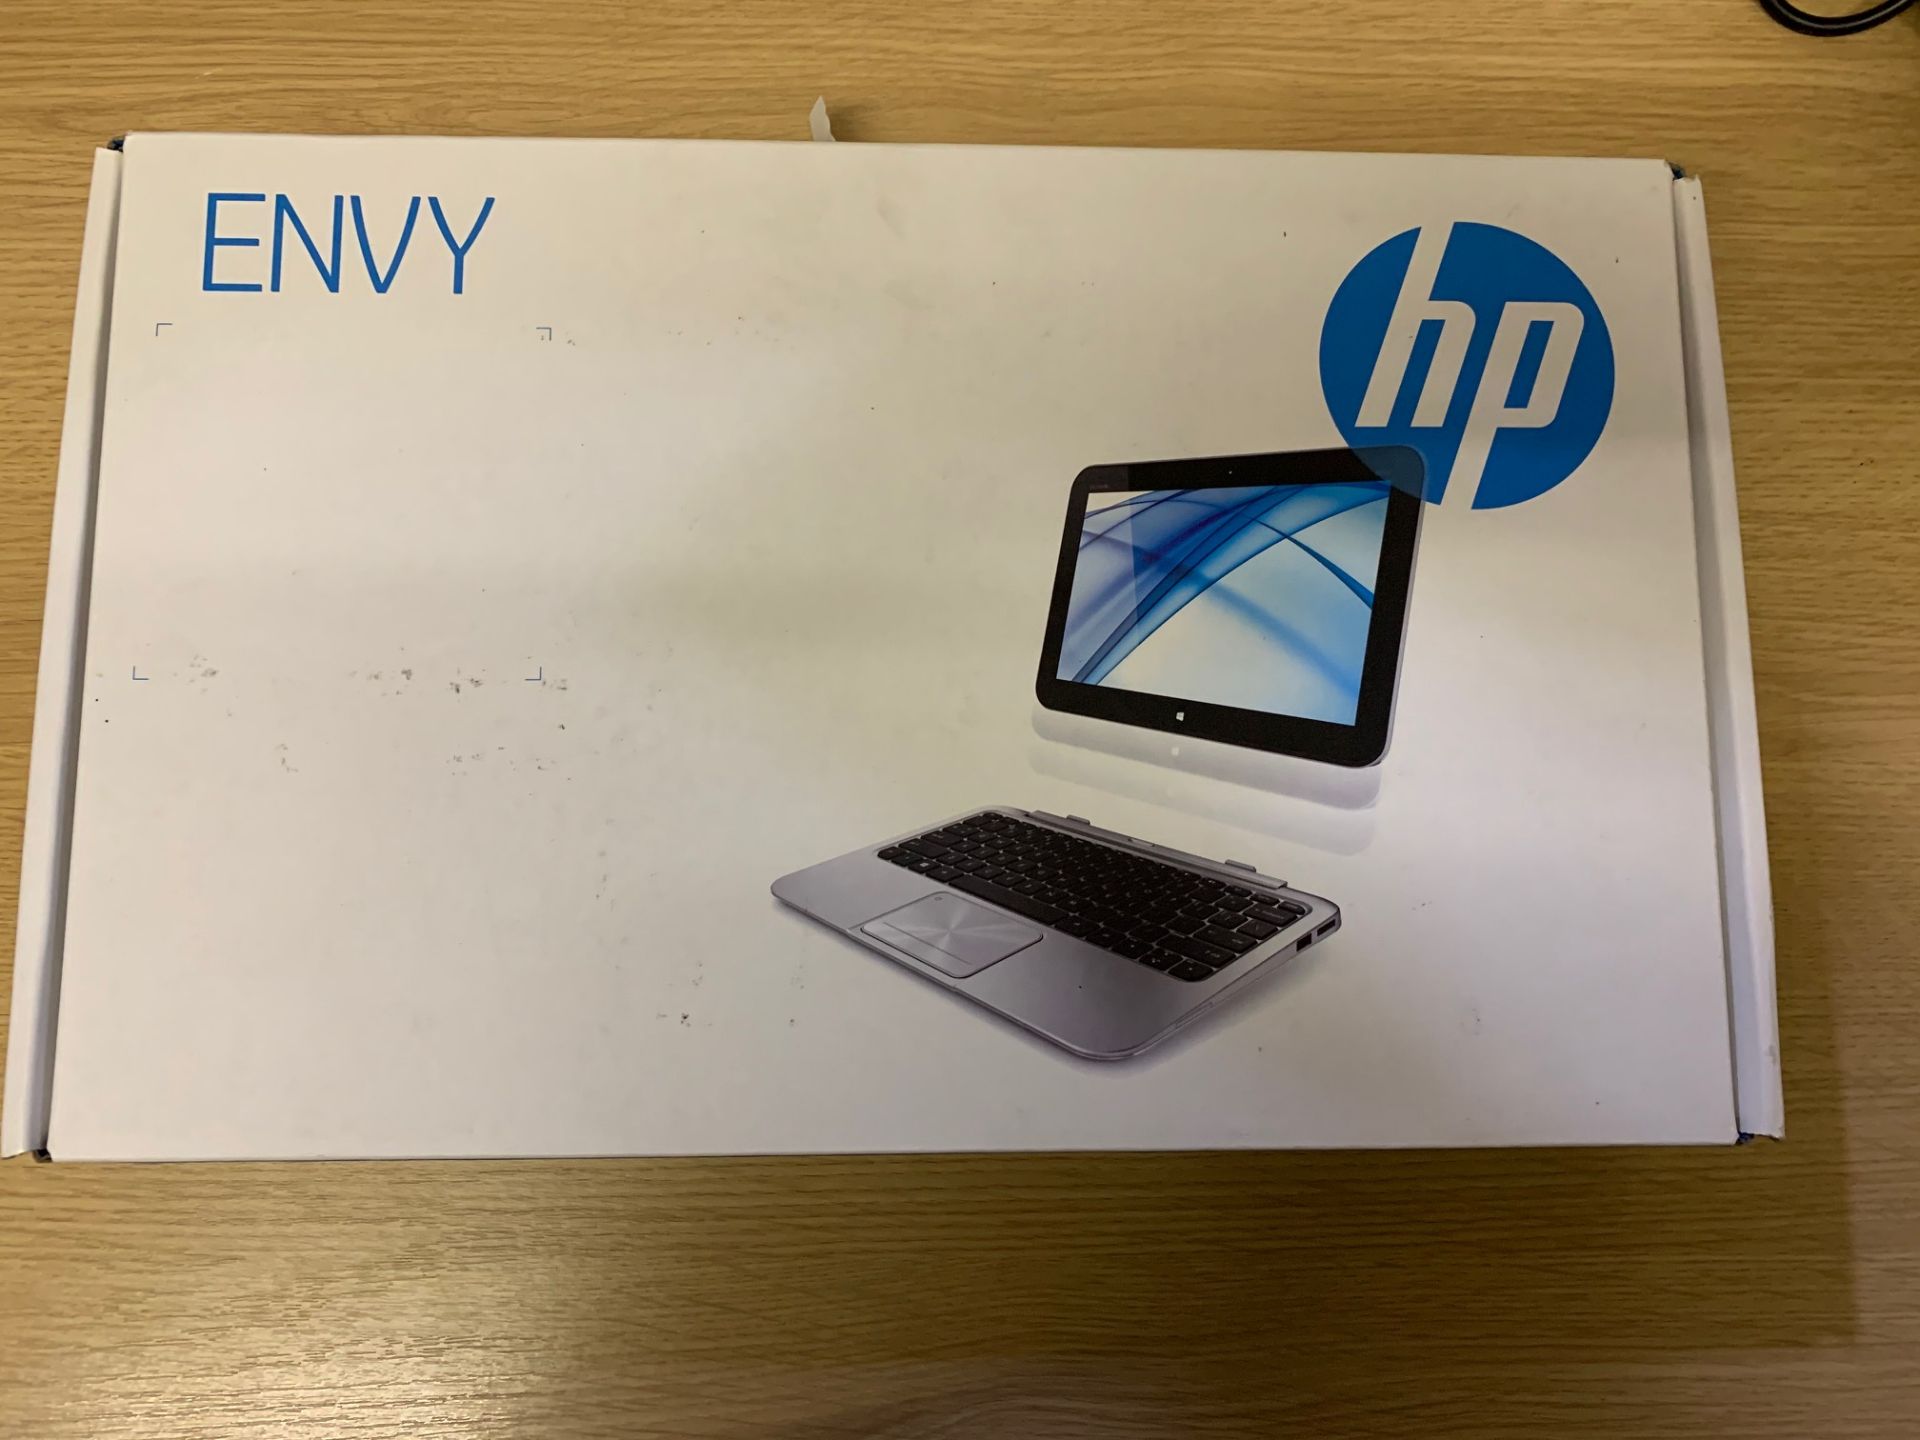 HP Envy Atom 22760 - 1.80GHz, 64GB SSD, 2GB RAM, Loaded With Windows 10 & Comes Boxed With Charger - Image 3 of 5